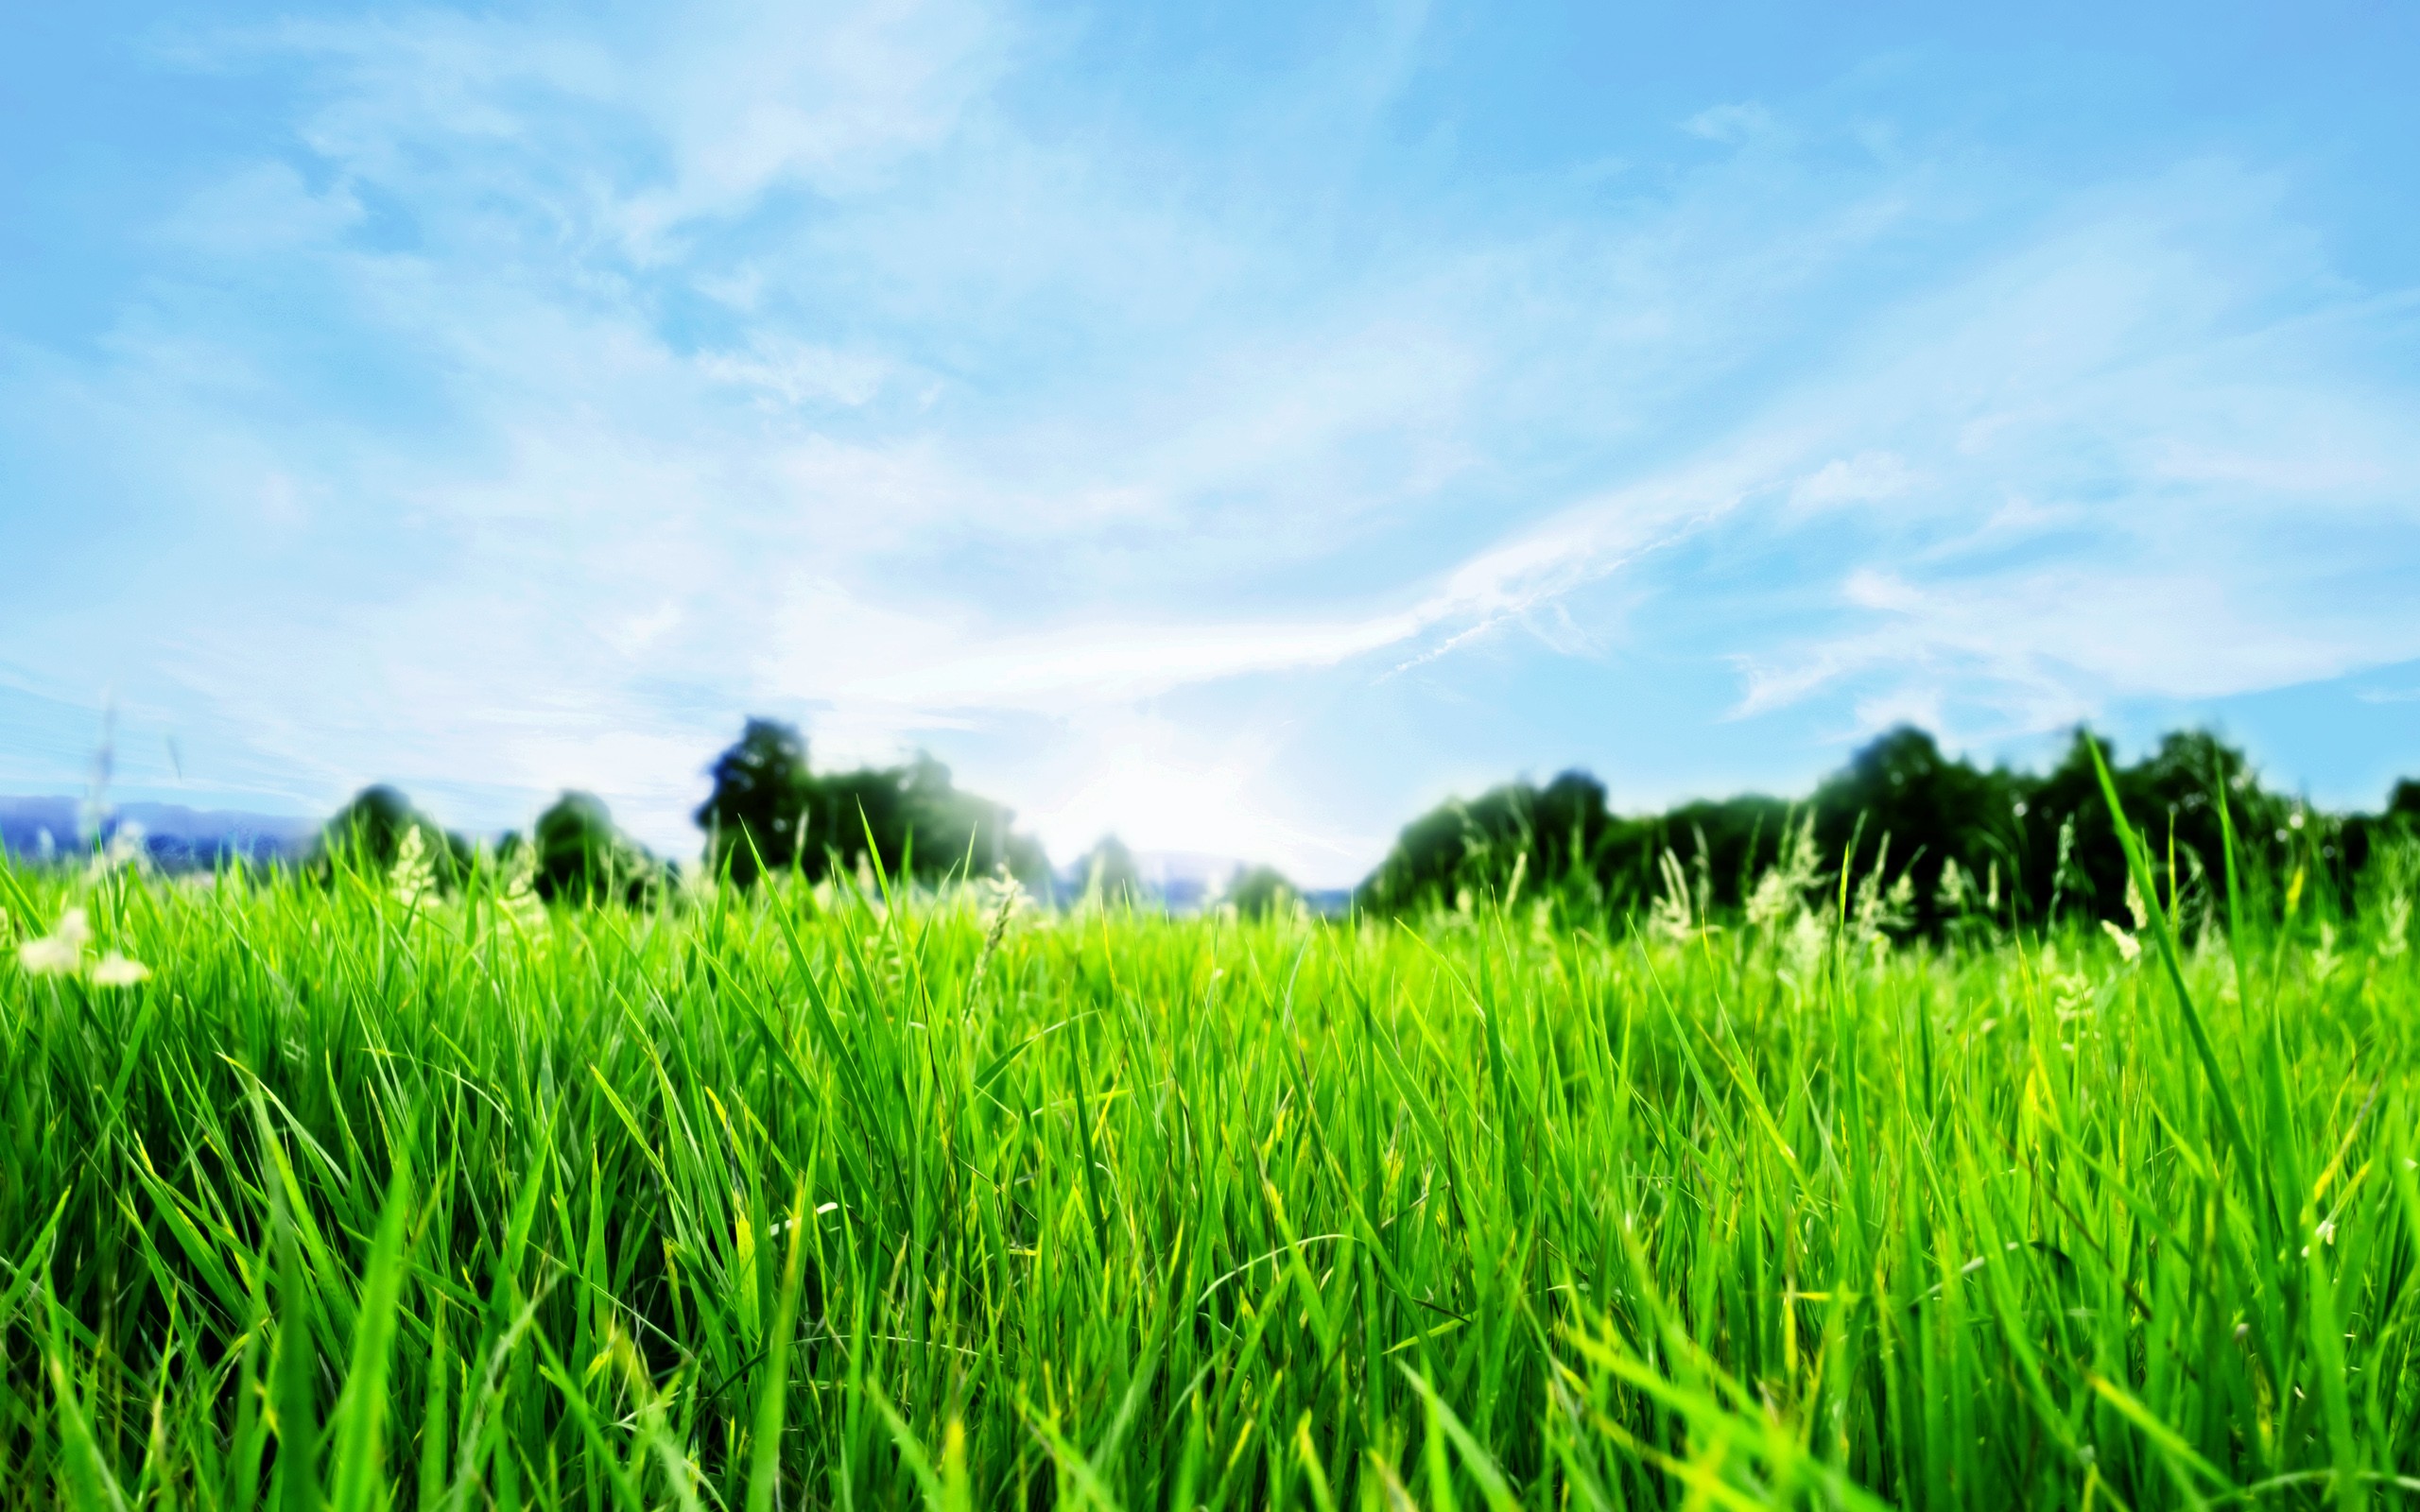 A picture of green grass